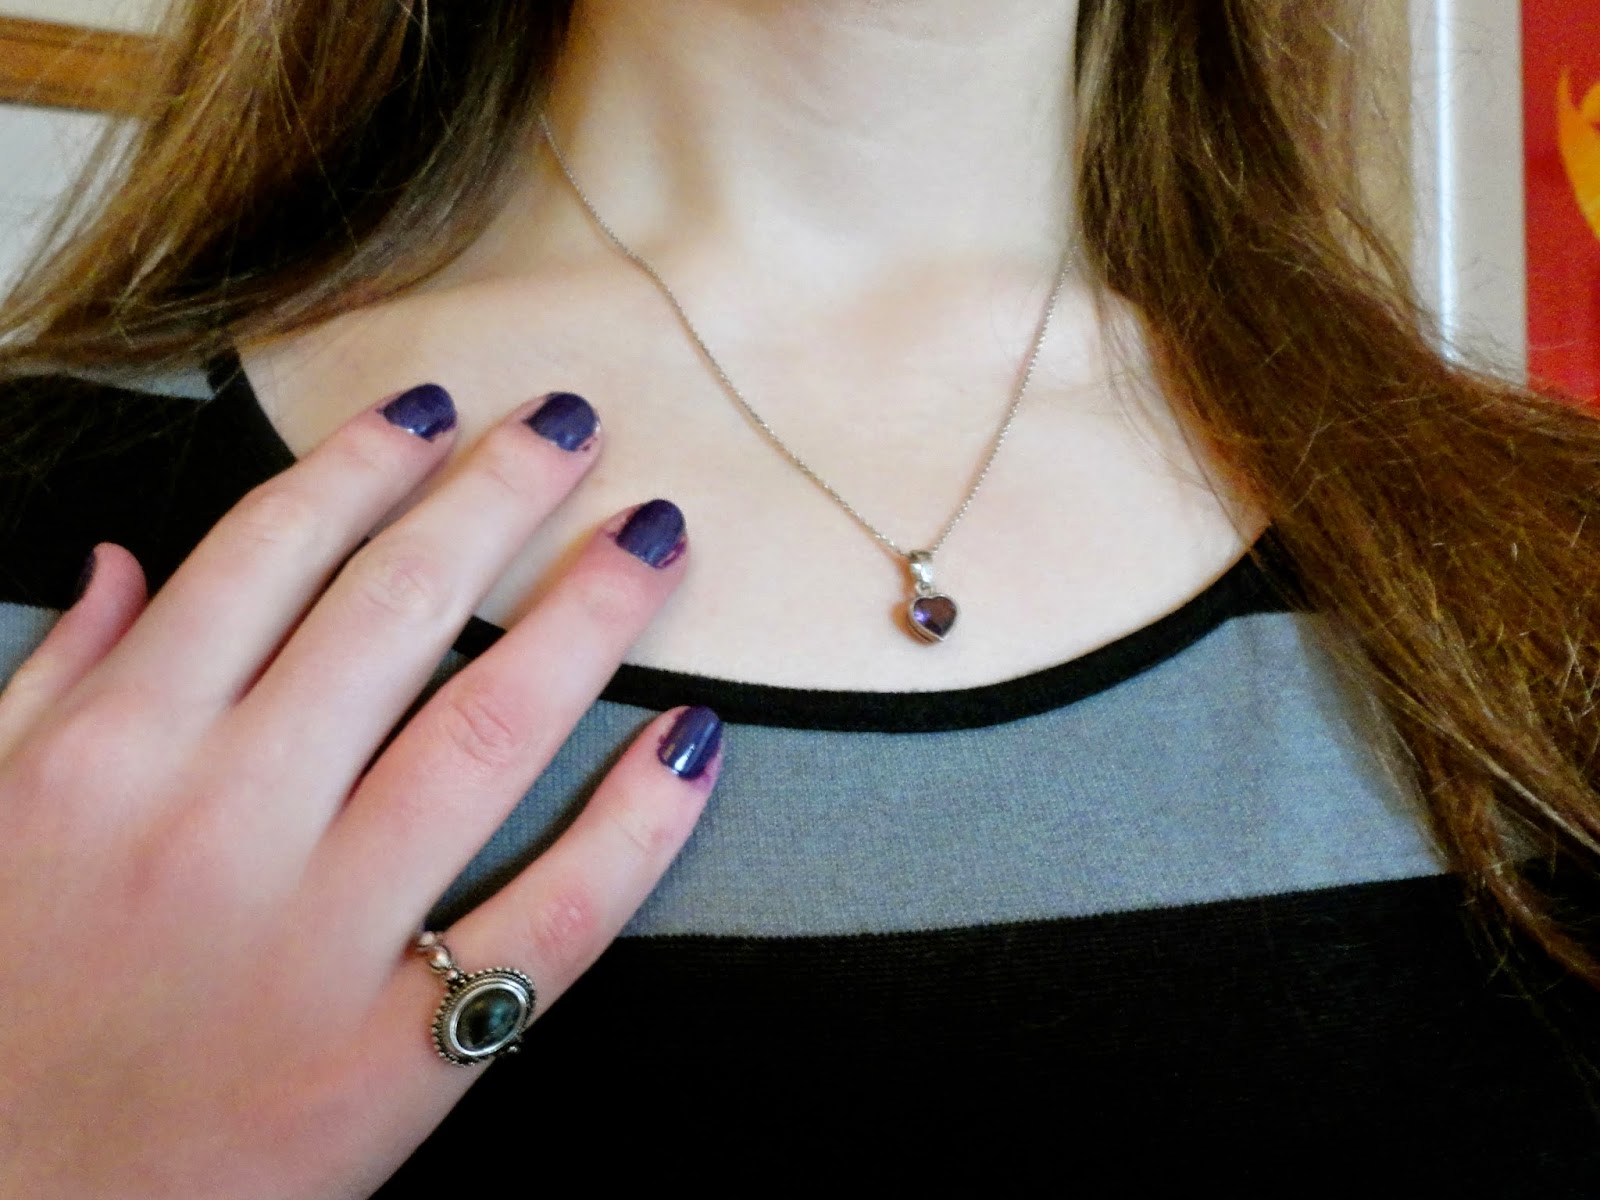 purple heart necklace, black stone ring and purple nails